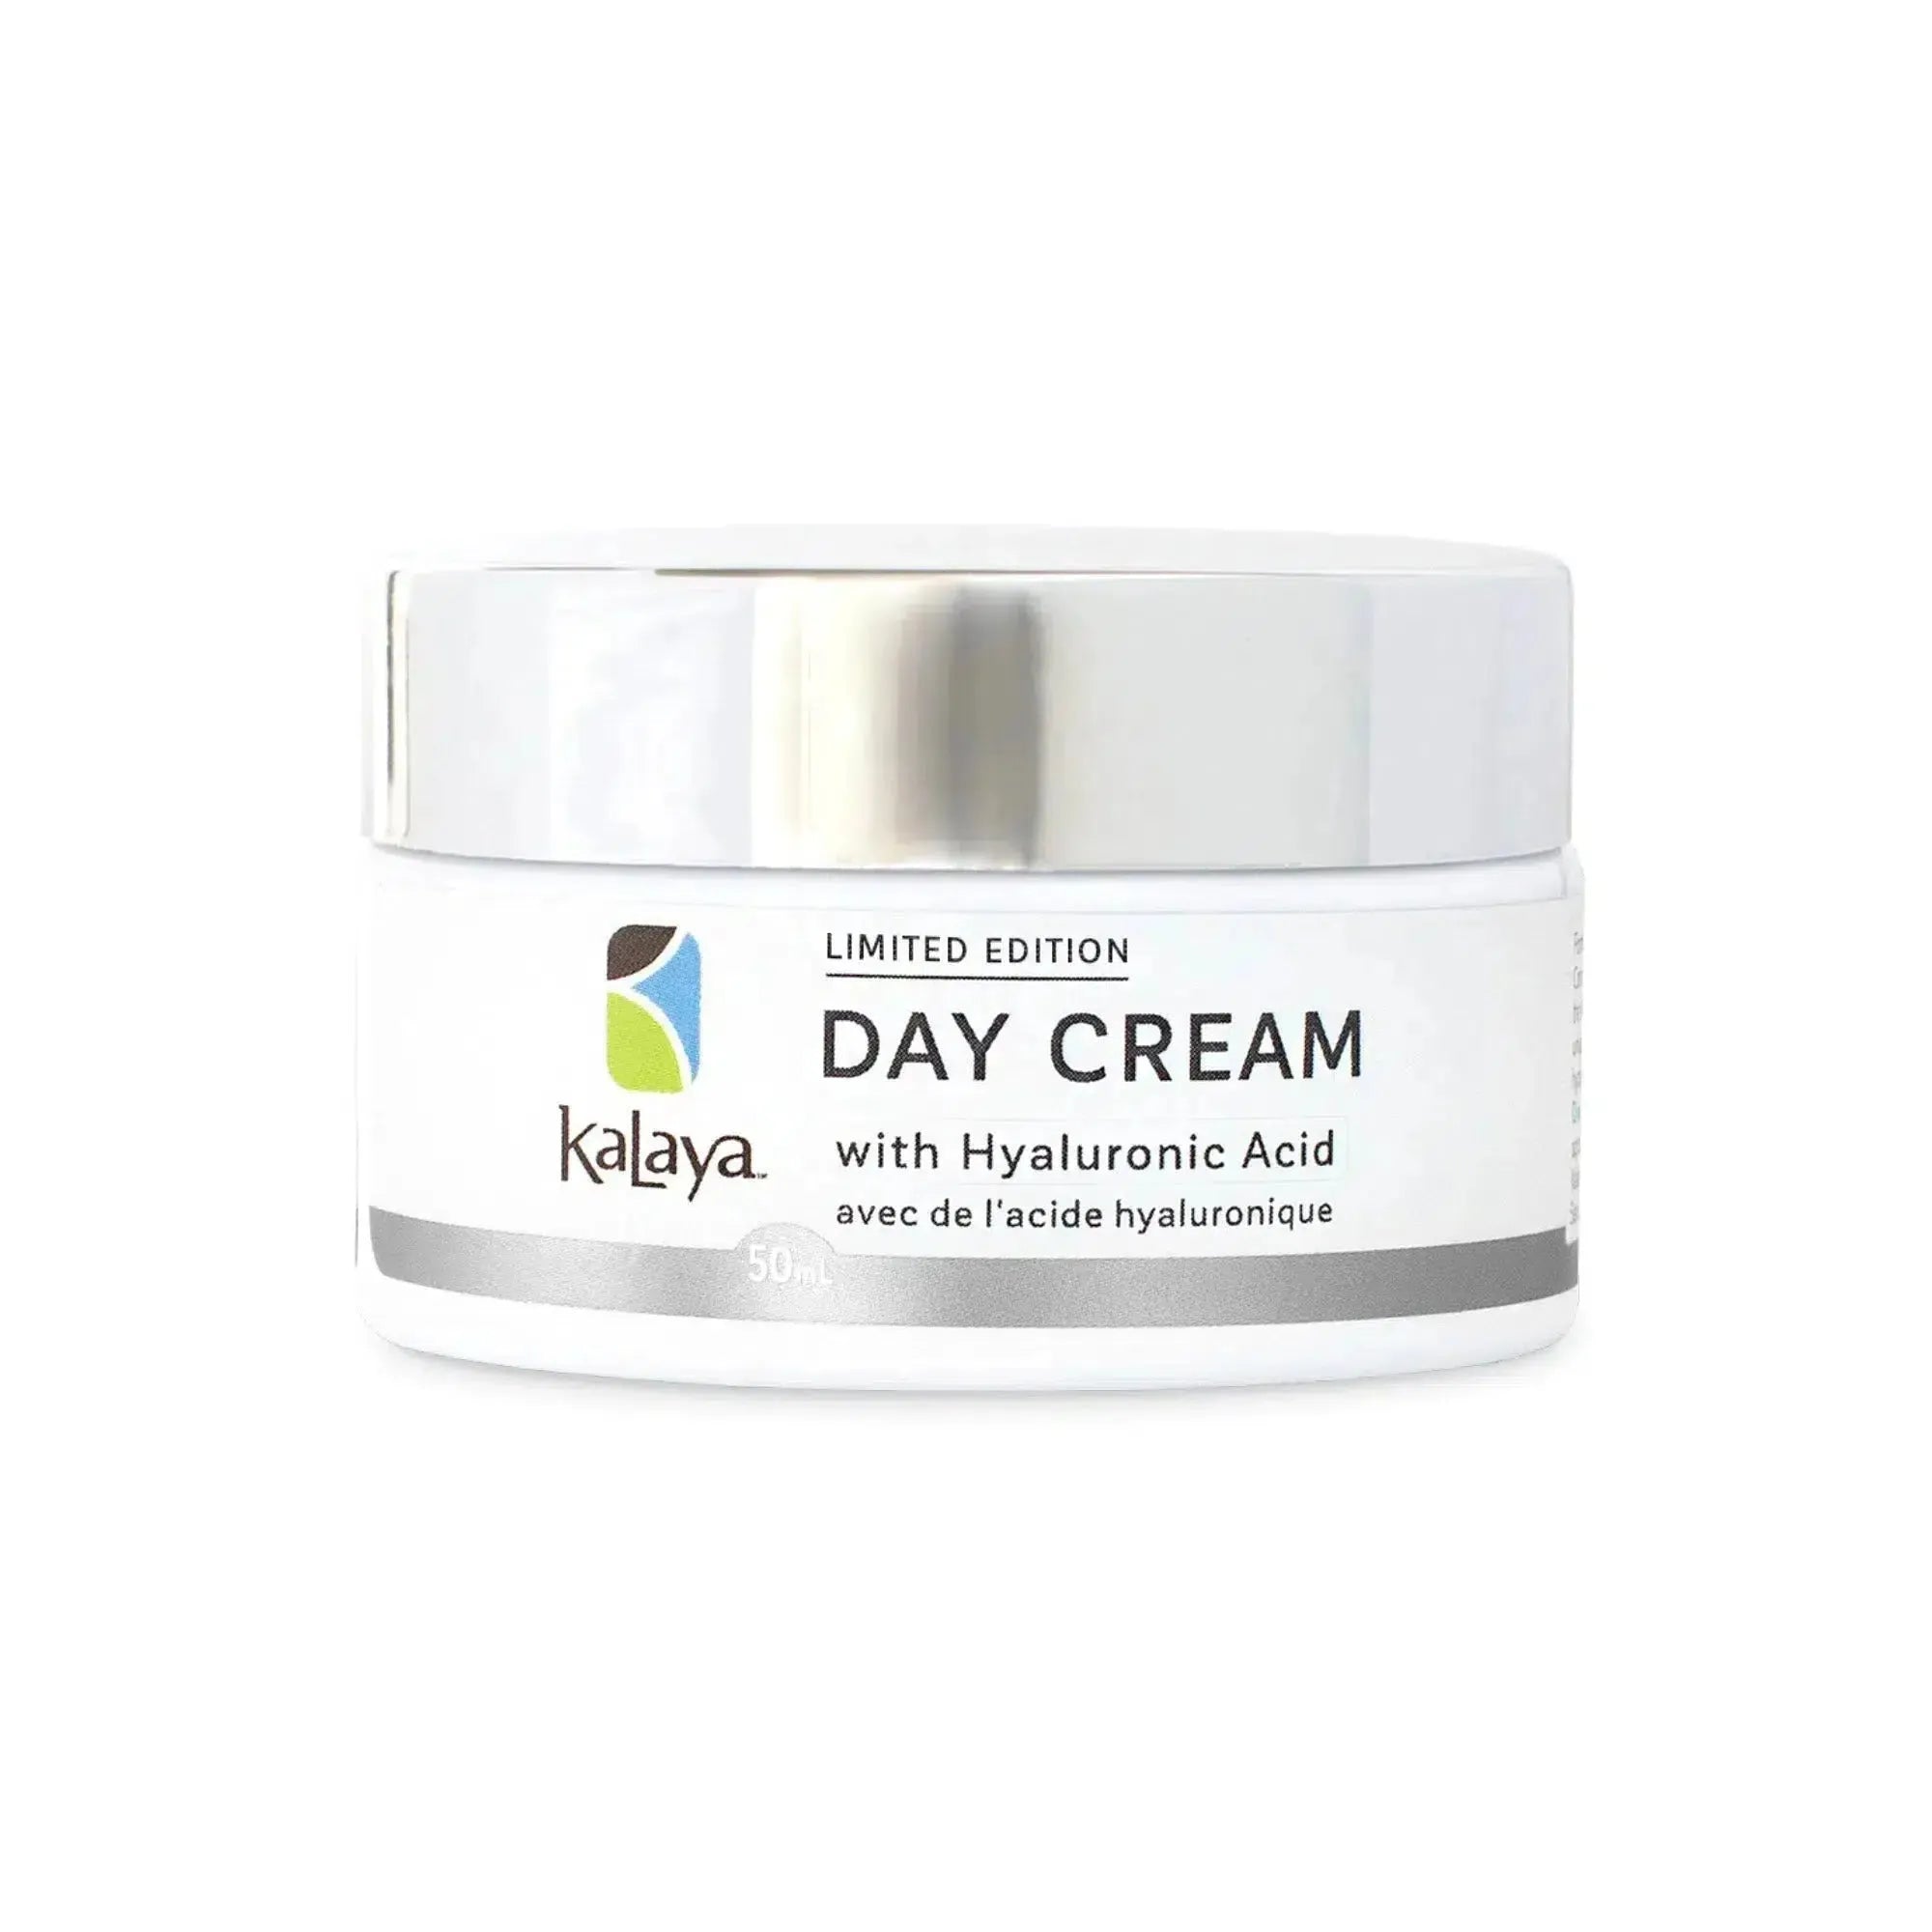 KaLaya Best Selling Pain Relief and Skincare Bundle